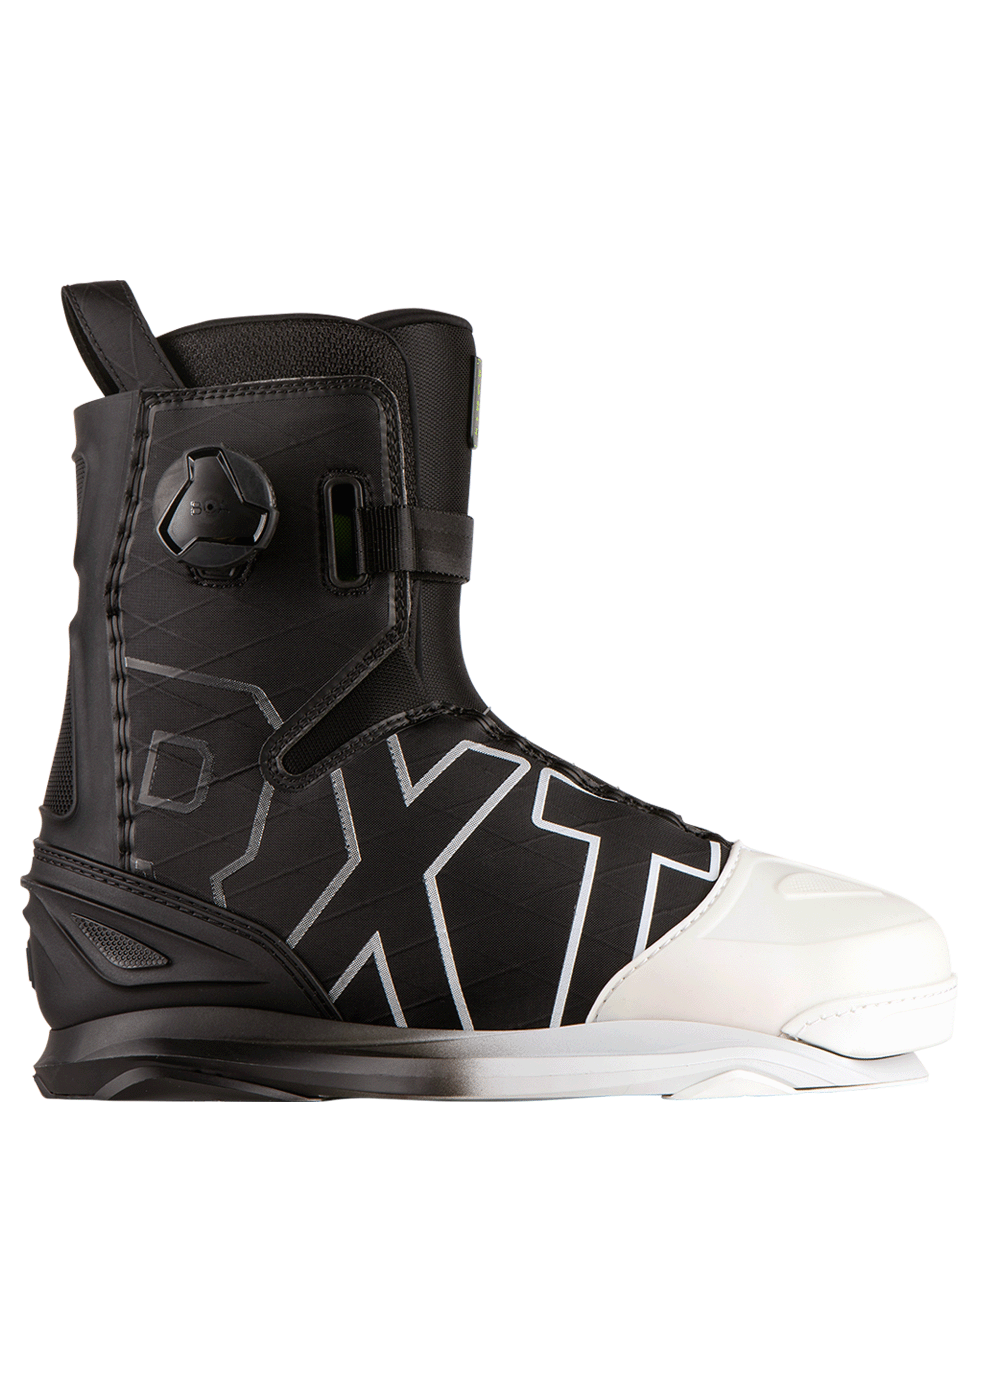 Ronix RXT BOA Intuition Men's Wakeboard Boots